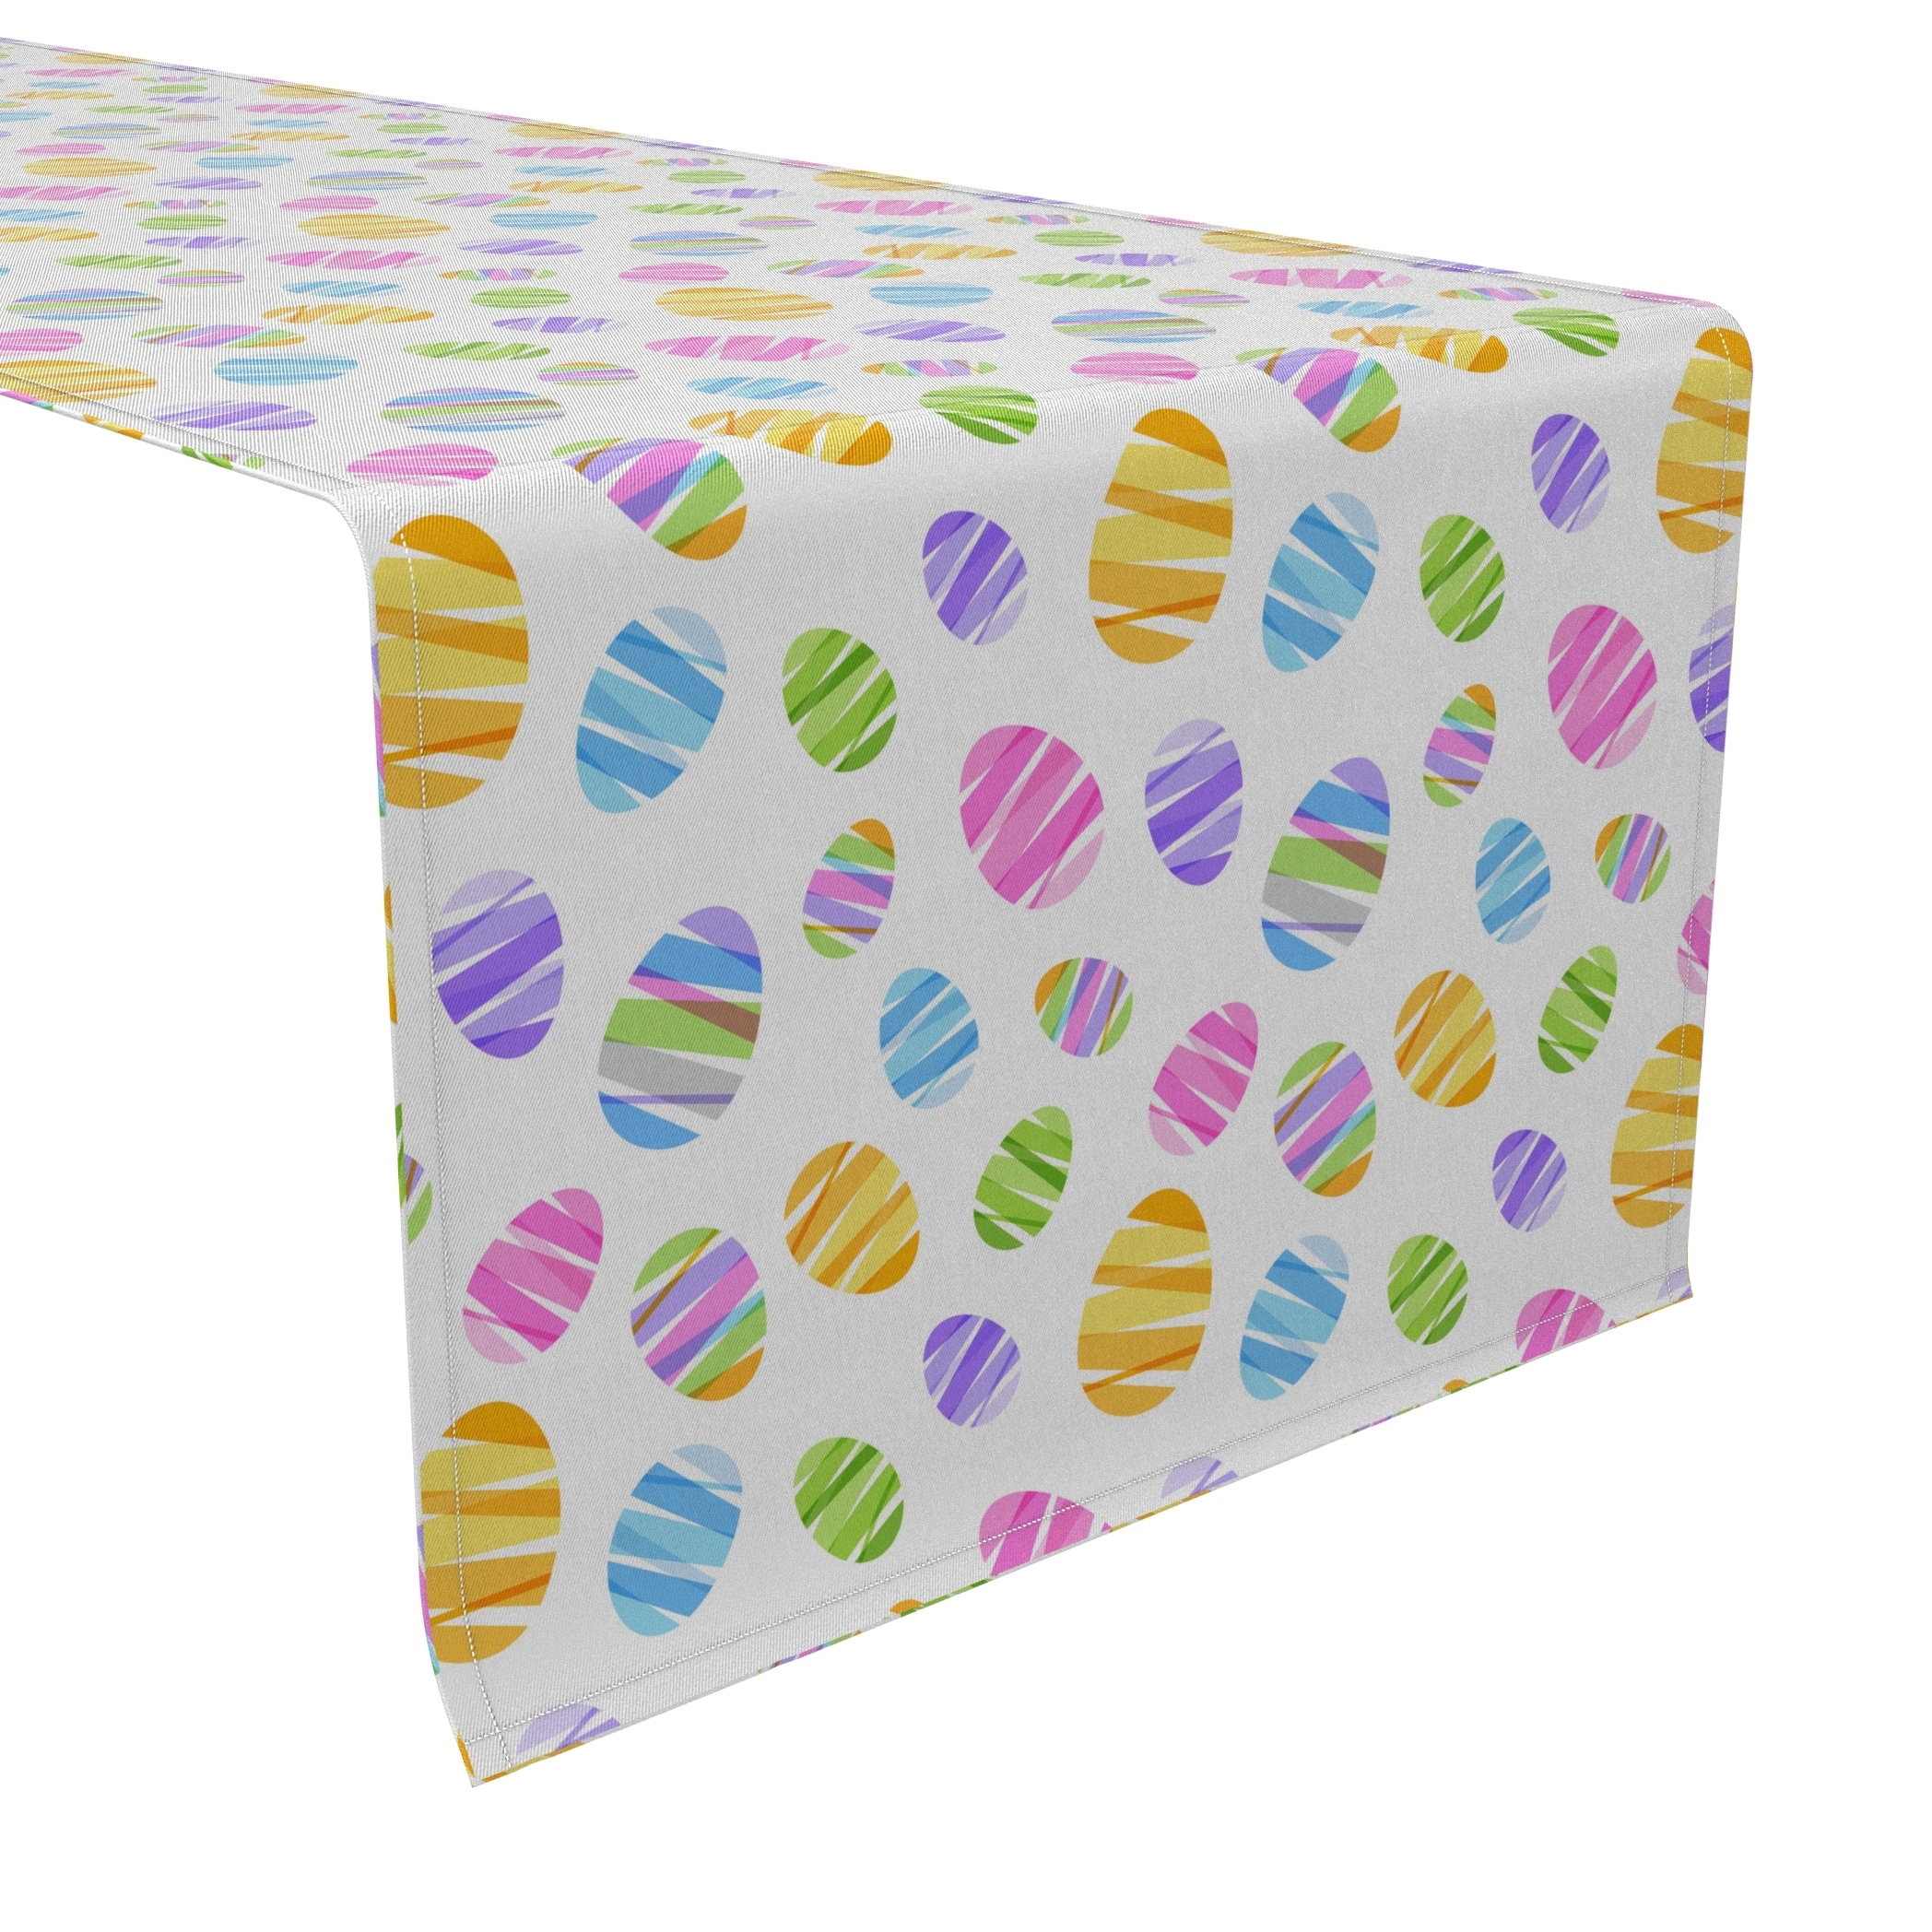 Fabric Textile Products, Inc. Table Runner, 100% Cotton, 16x108", Ribbon Easter Eggs